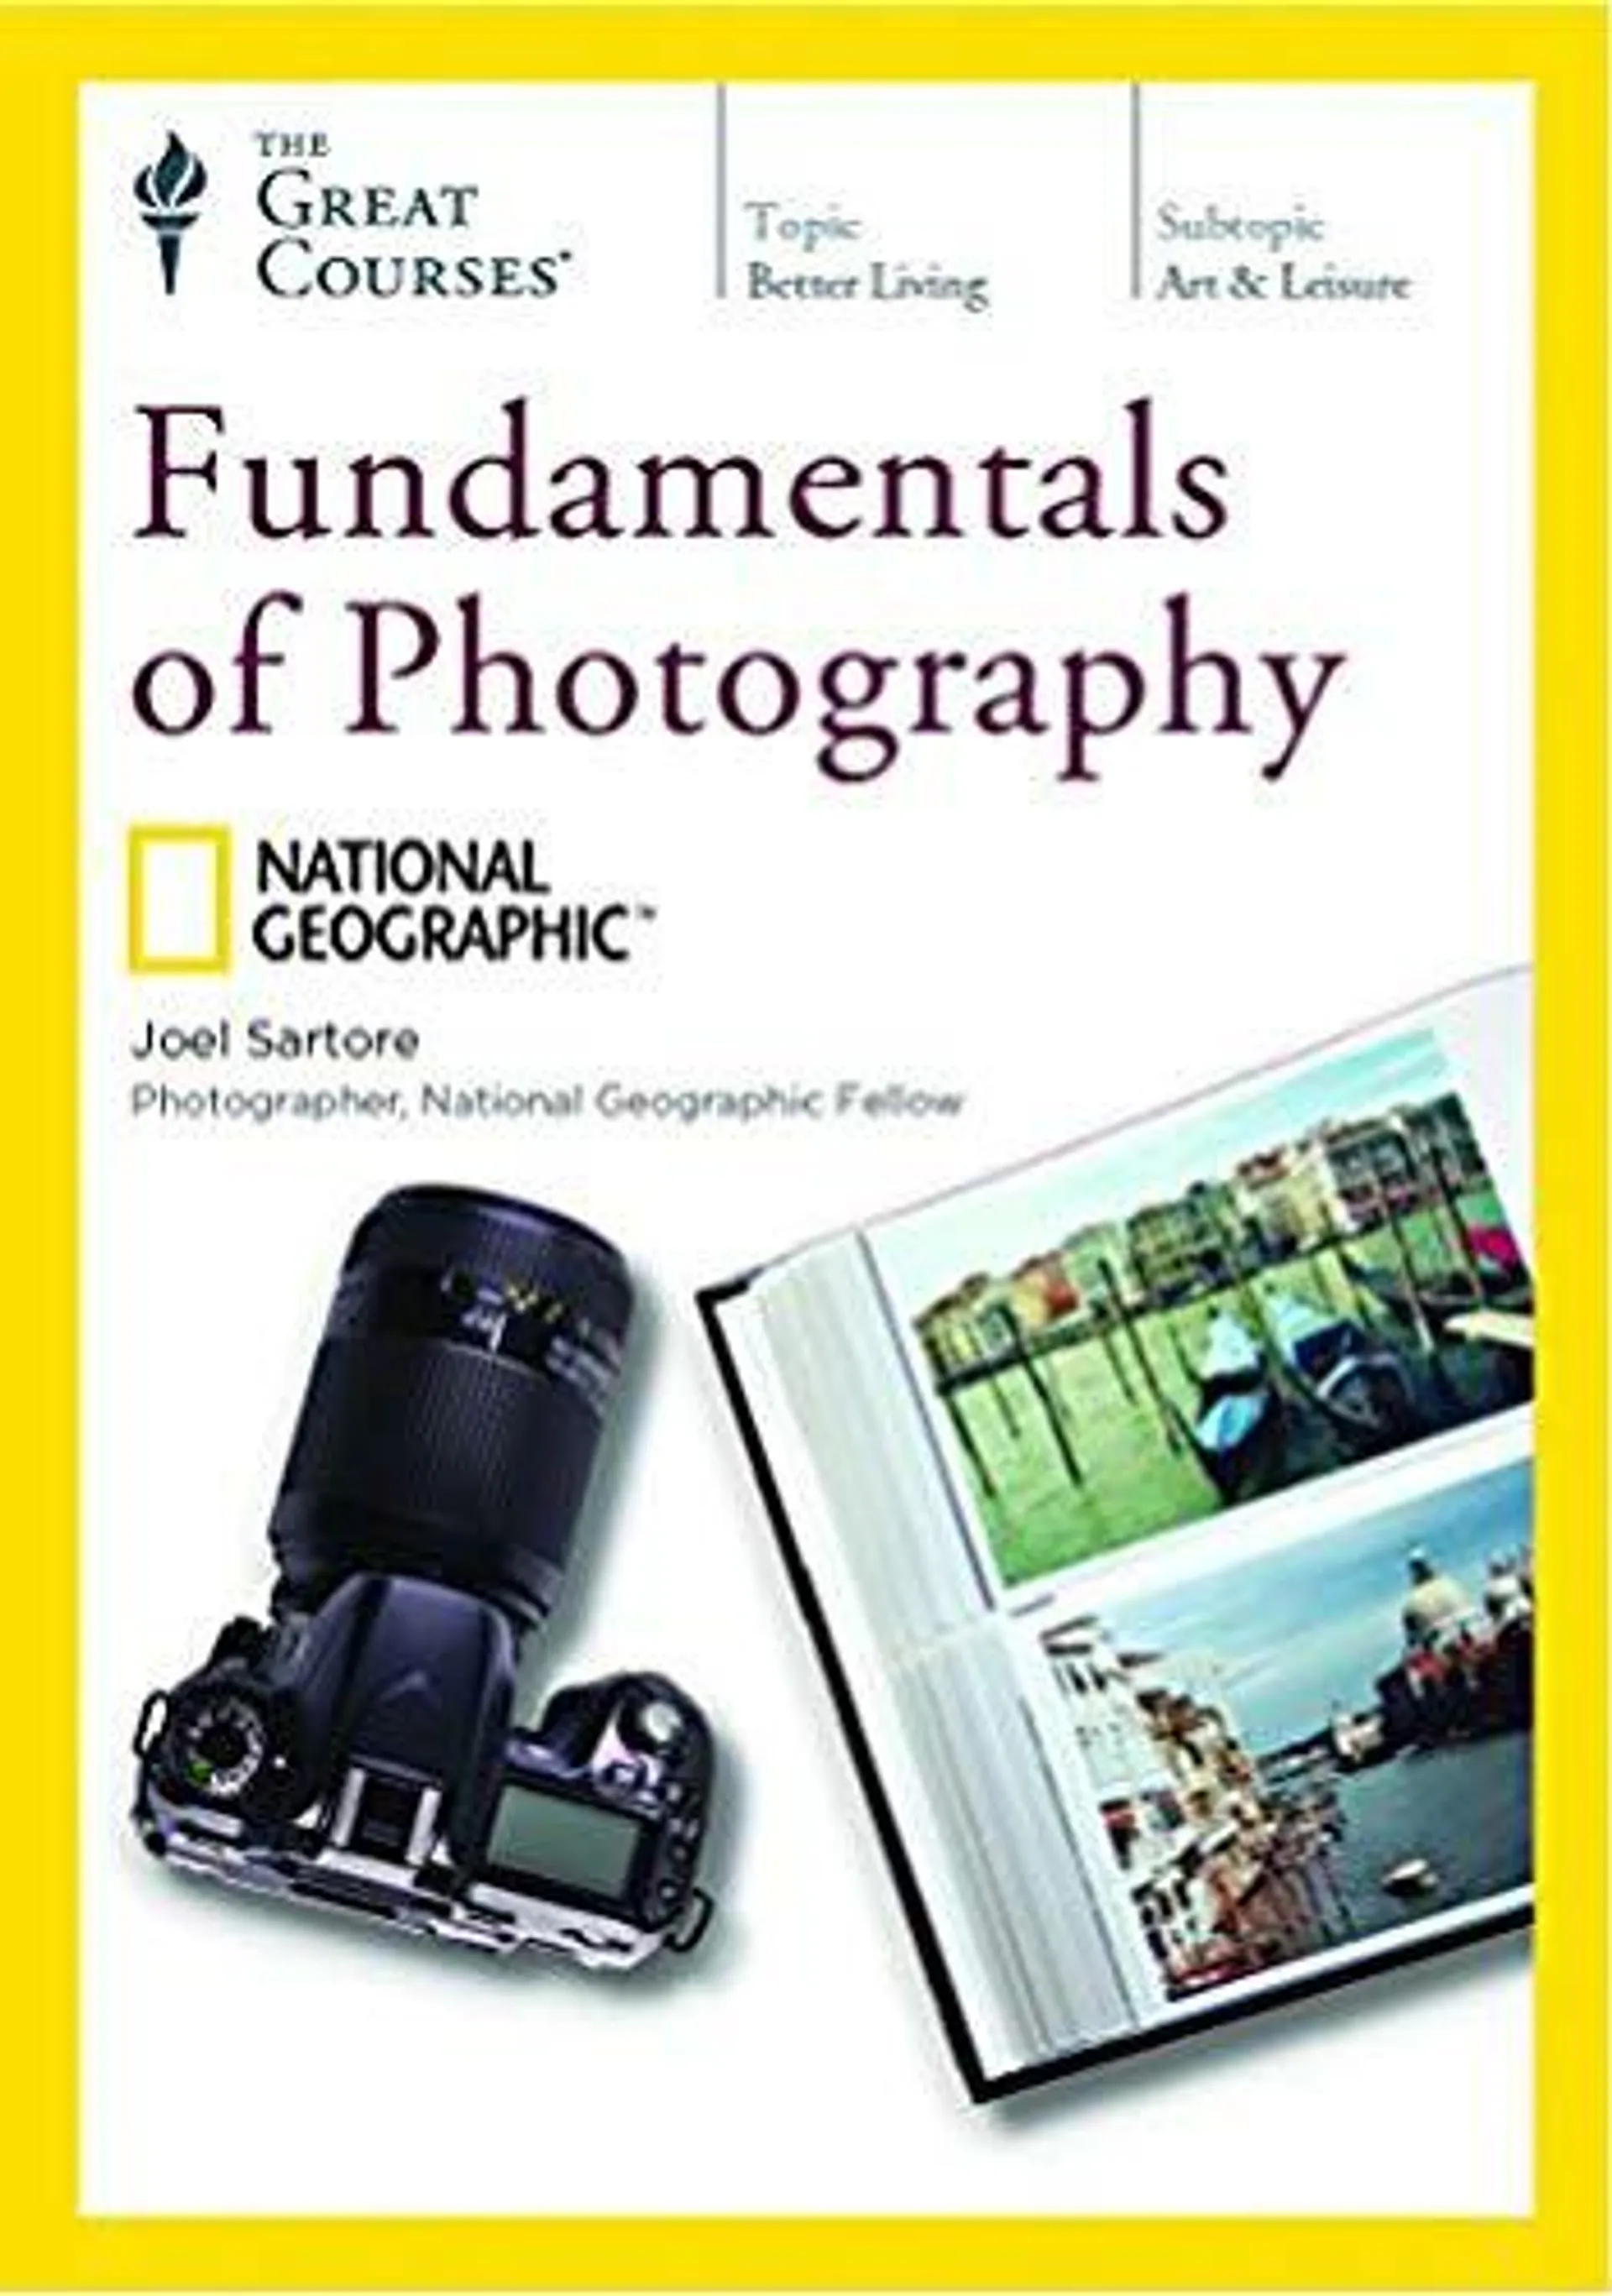 Fundamentals of Photography (Great Courses) (Teaching Company) (Course Number 7901 DVD) (Teaching Company) by joel-sartore